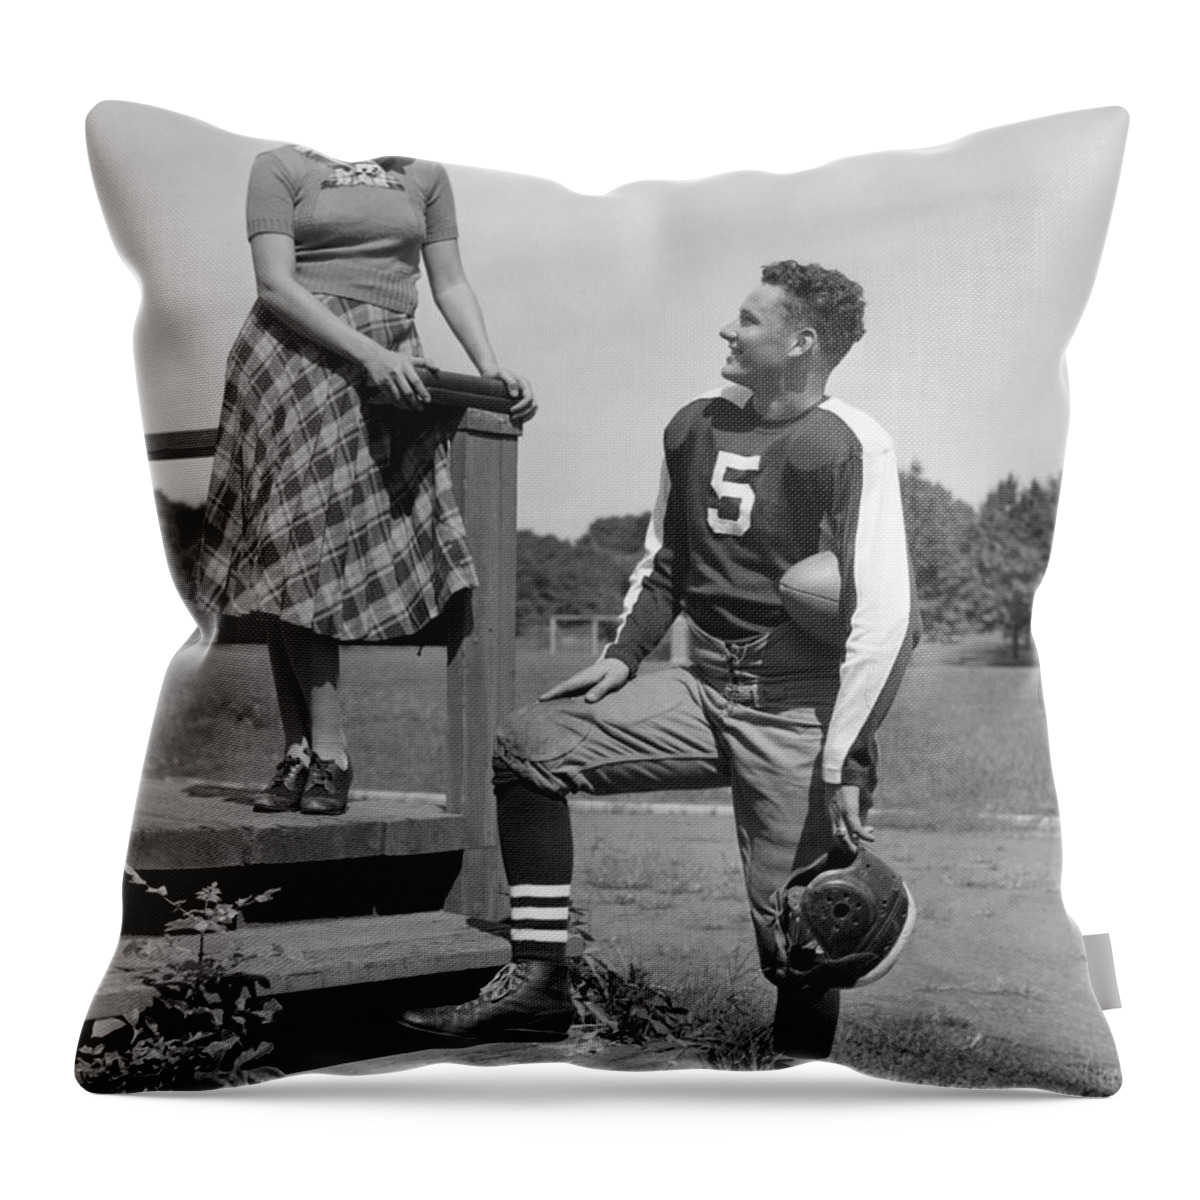 1930s Throw Pillow featuring the photograph Teenage Flirtation, C.1930-40s by H. Armstrong Roberts/ClassicStock